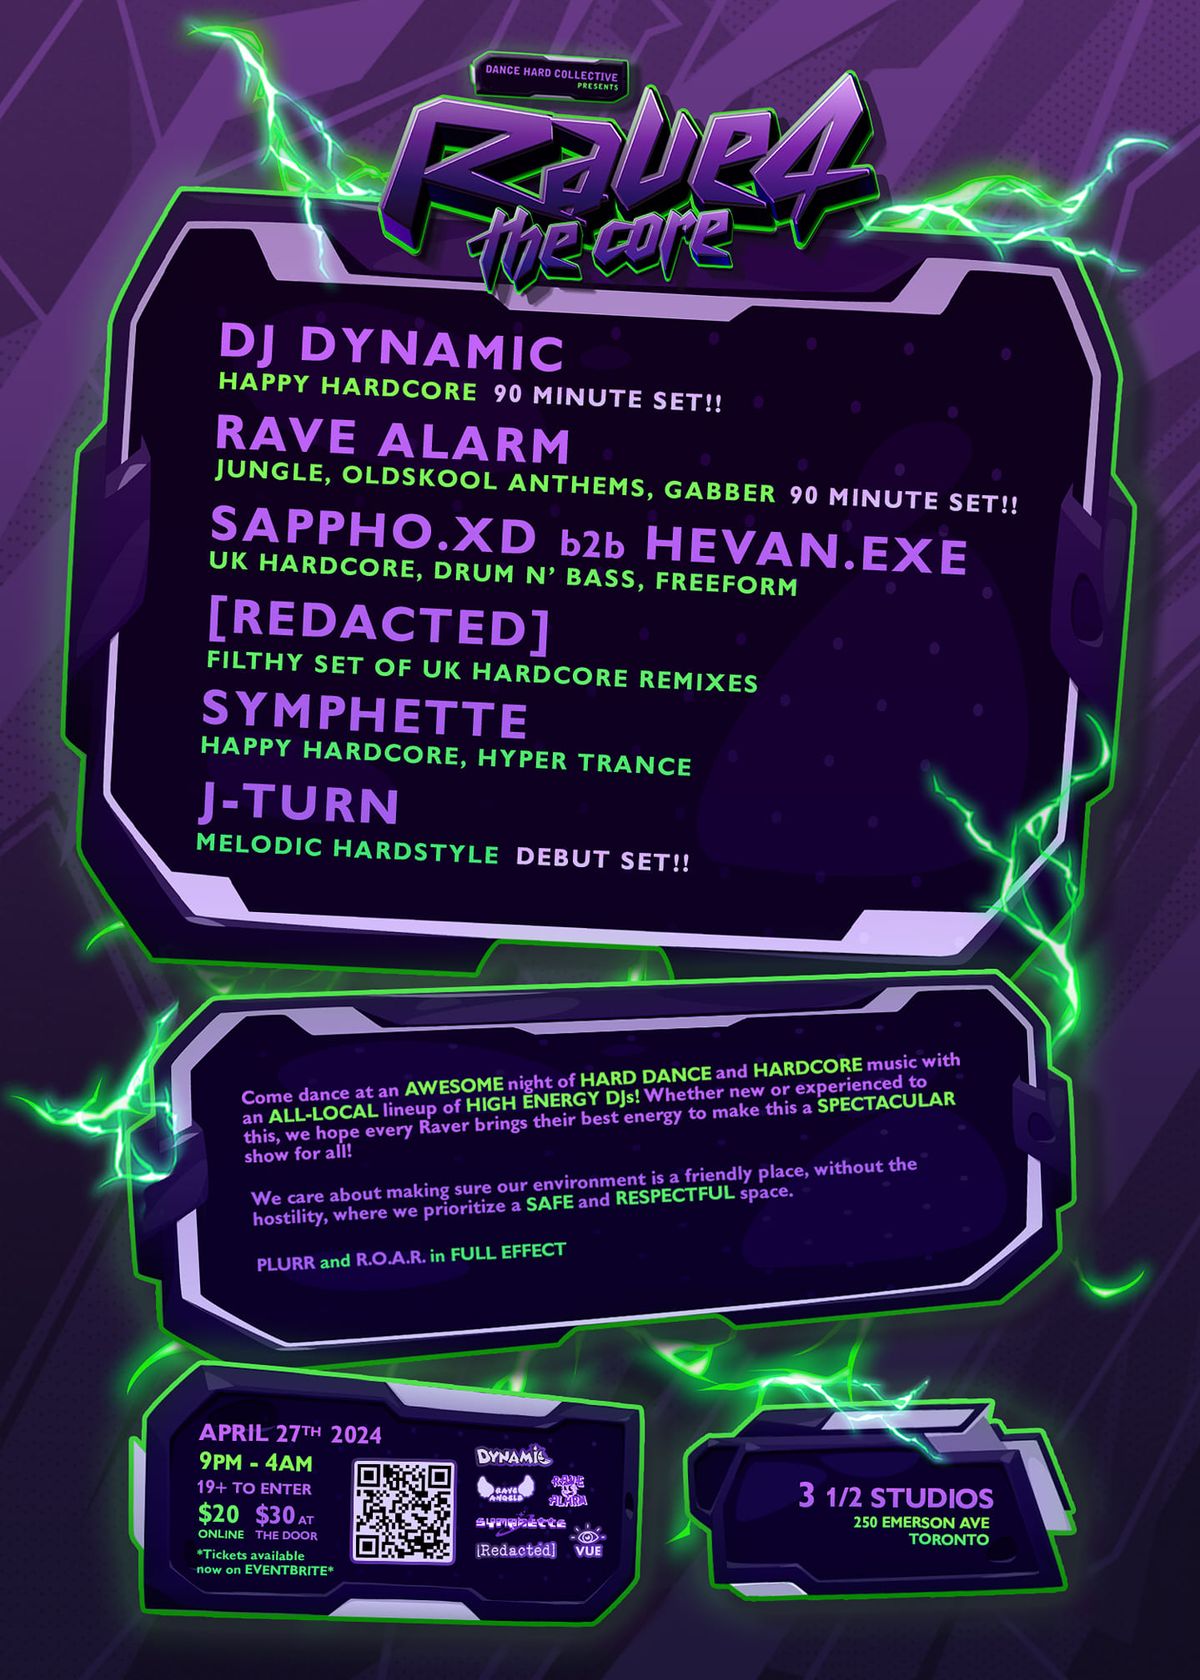 Rave 4 The Core! Happy Hardcore Rave Feat. DJ Dynamic, Ravealarm, [Redacted], and more!